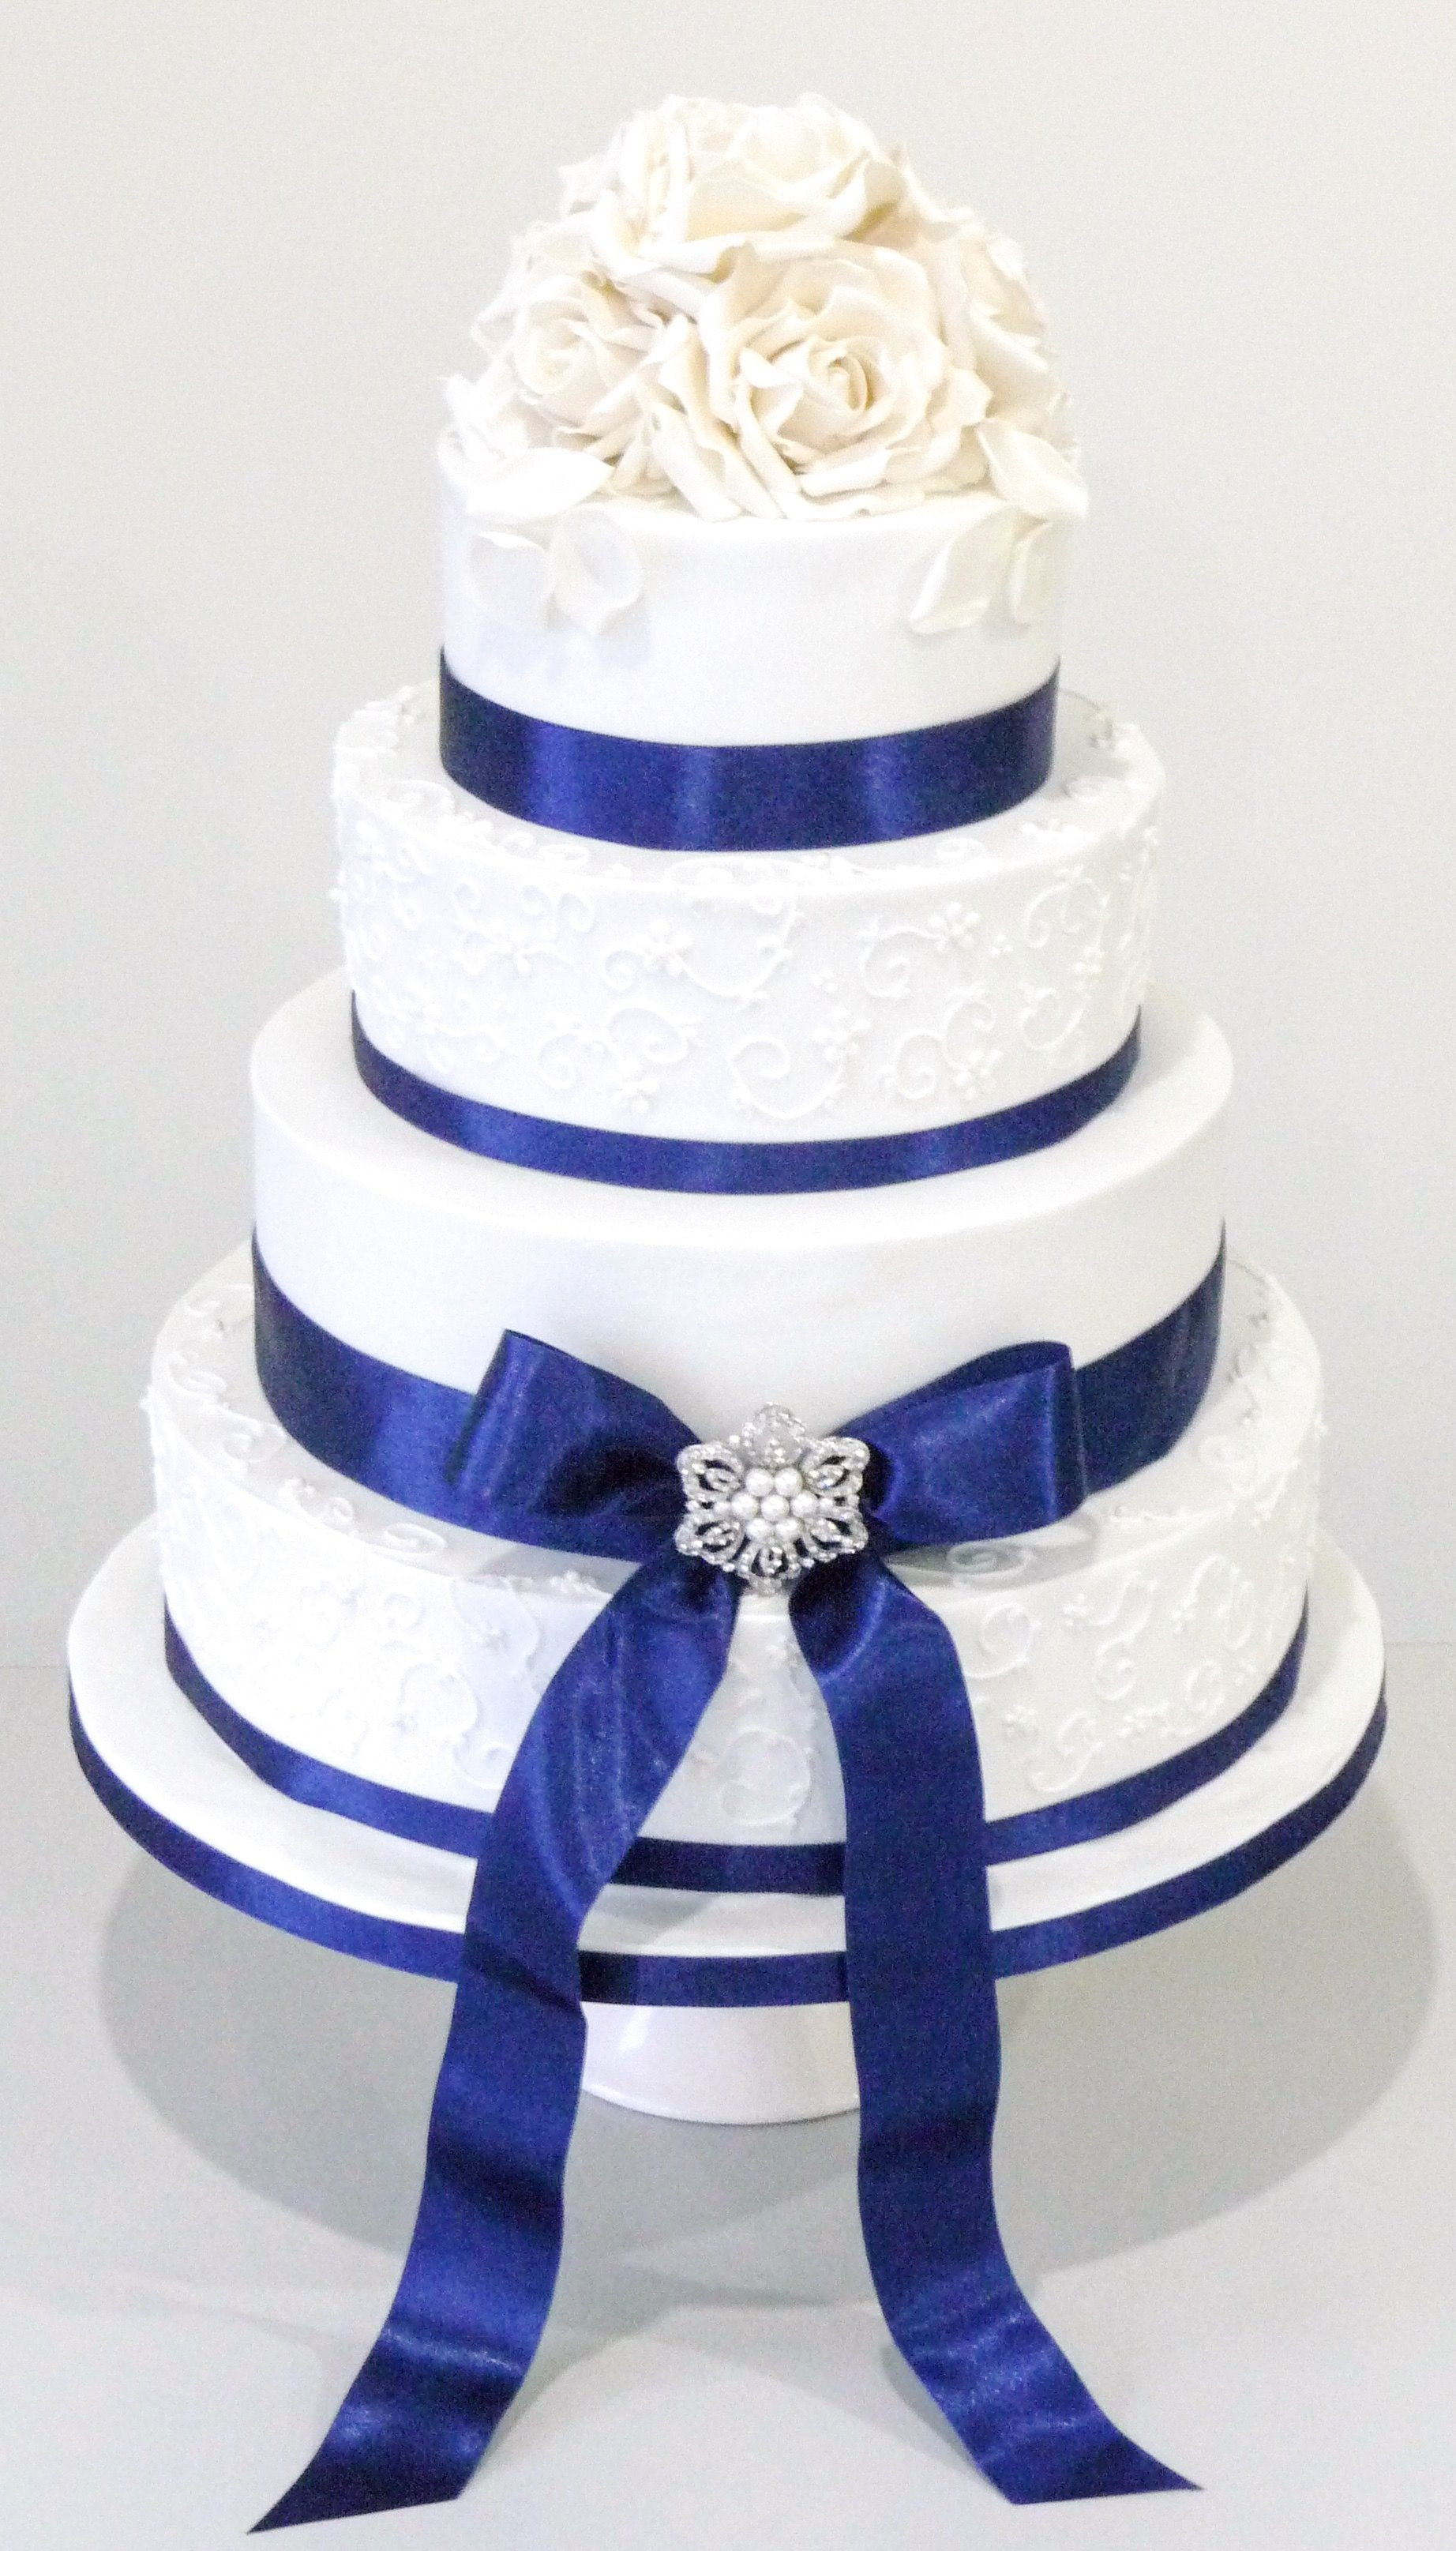 Ribbons For Wedding Cakes
 White sugar flowers on this 4 tier wedding cake with Royal